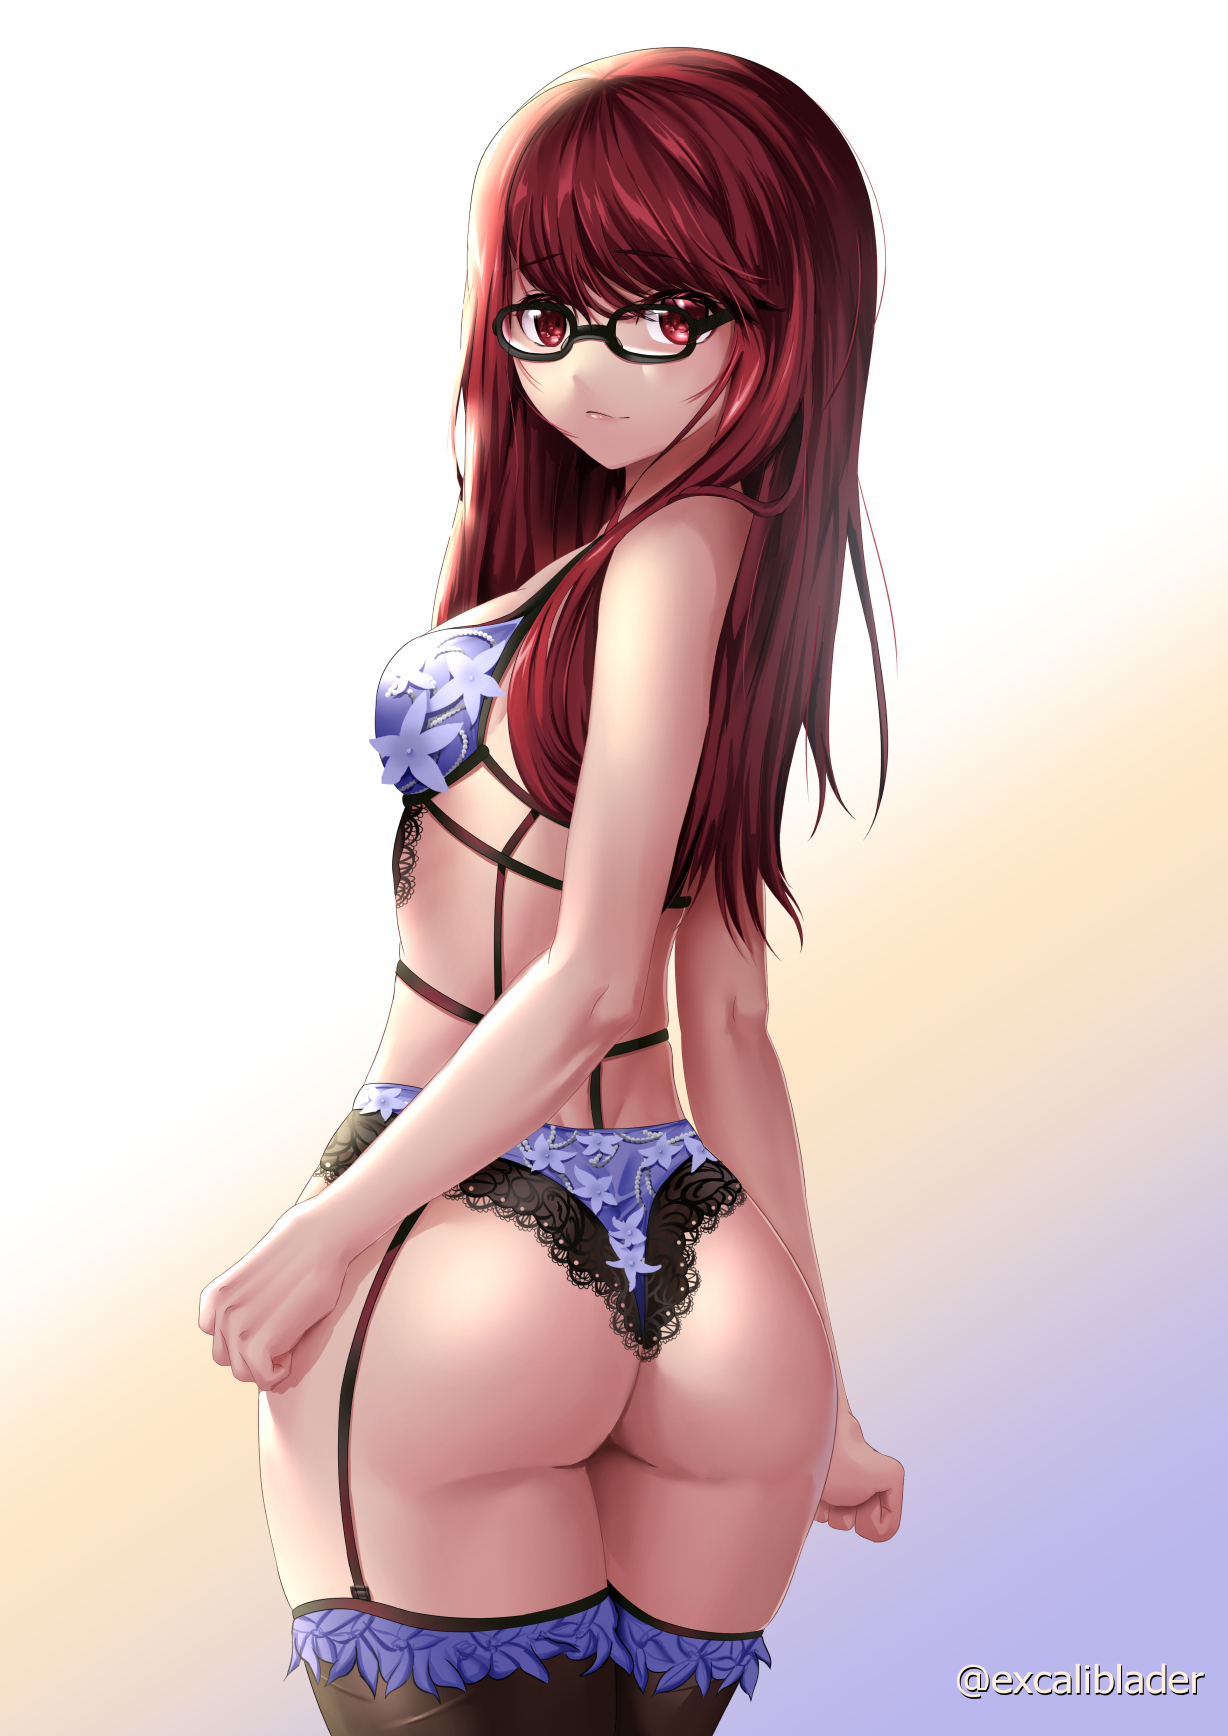 Anime 1228x1736 anime girls Persona 5 Kasumi Yoshizawa Excaliblader lingerie lace underwear ass black stockings garter straps red eyes thighs redhead glasses